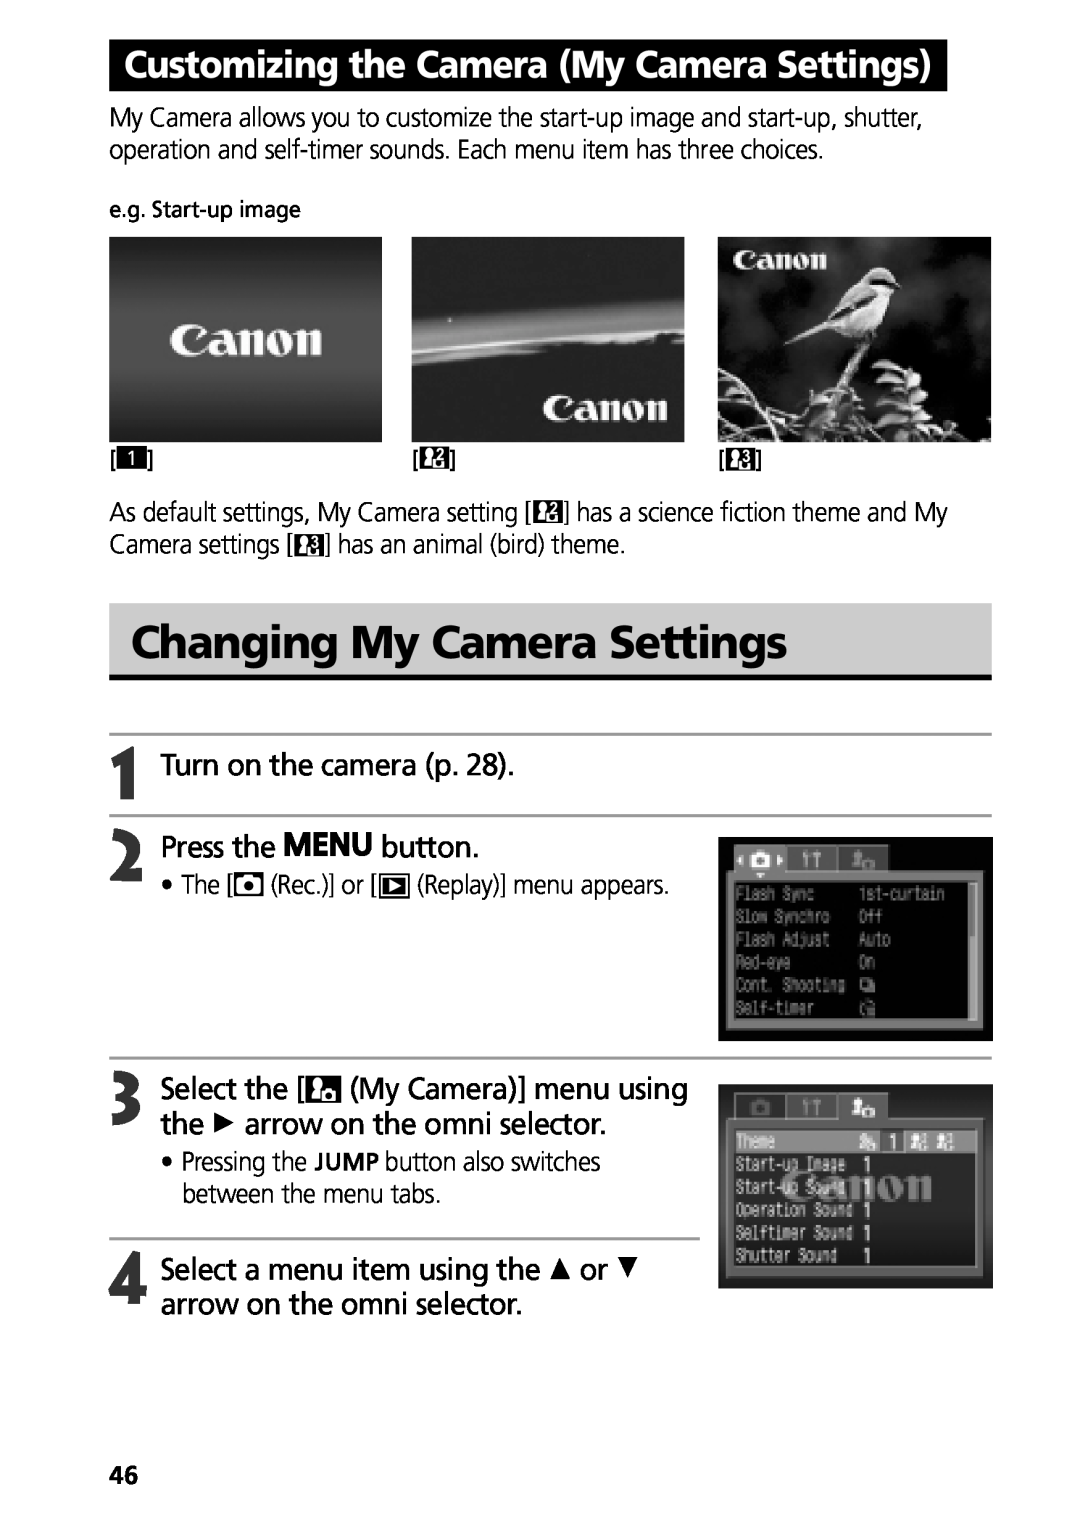 Canon G3 Changing My Camera Settings, Customizing the Camera My Camera Settings, Turn on the camera p 2 Press the button 